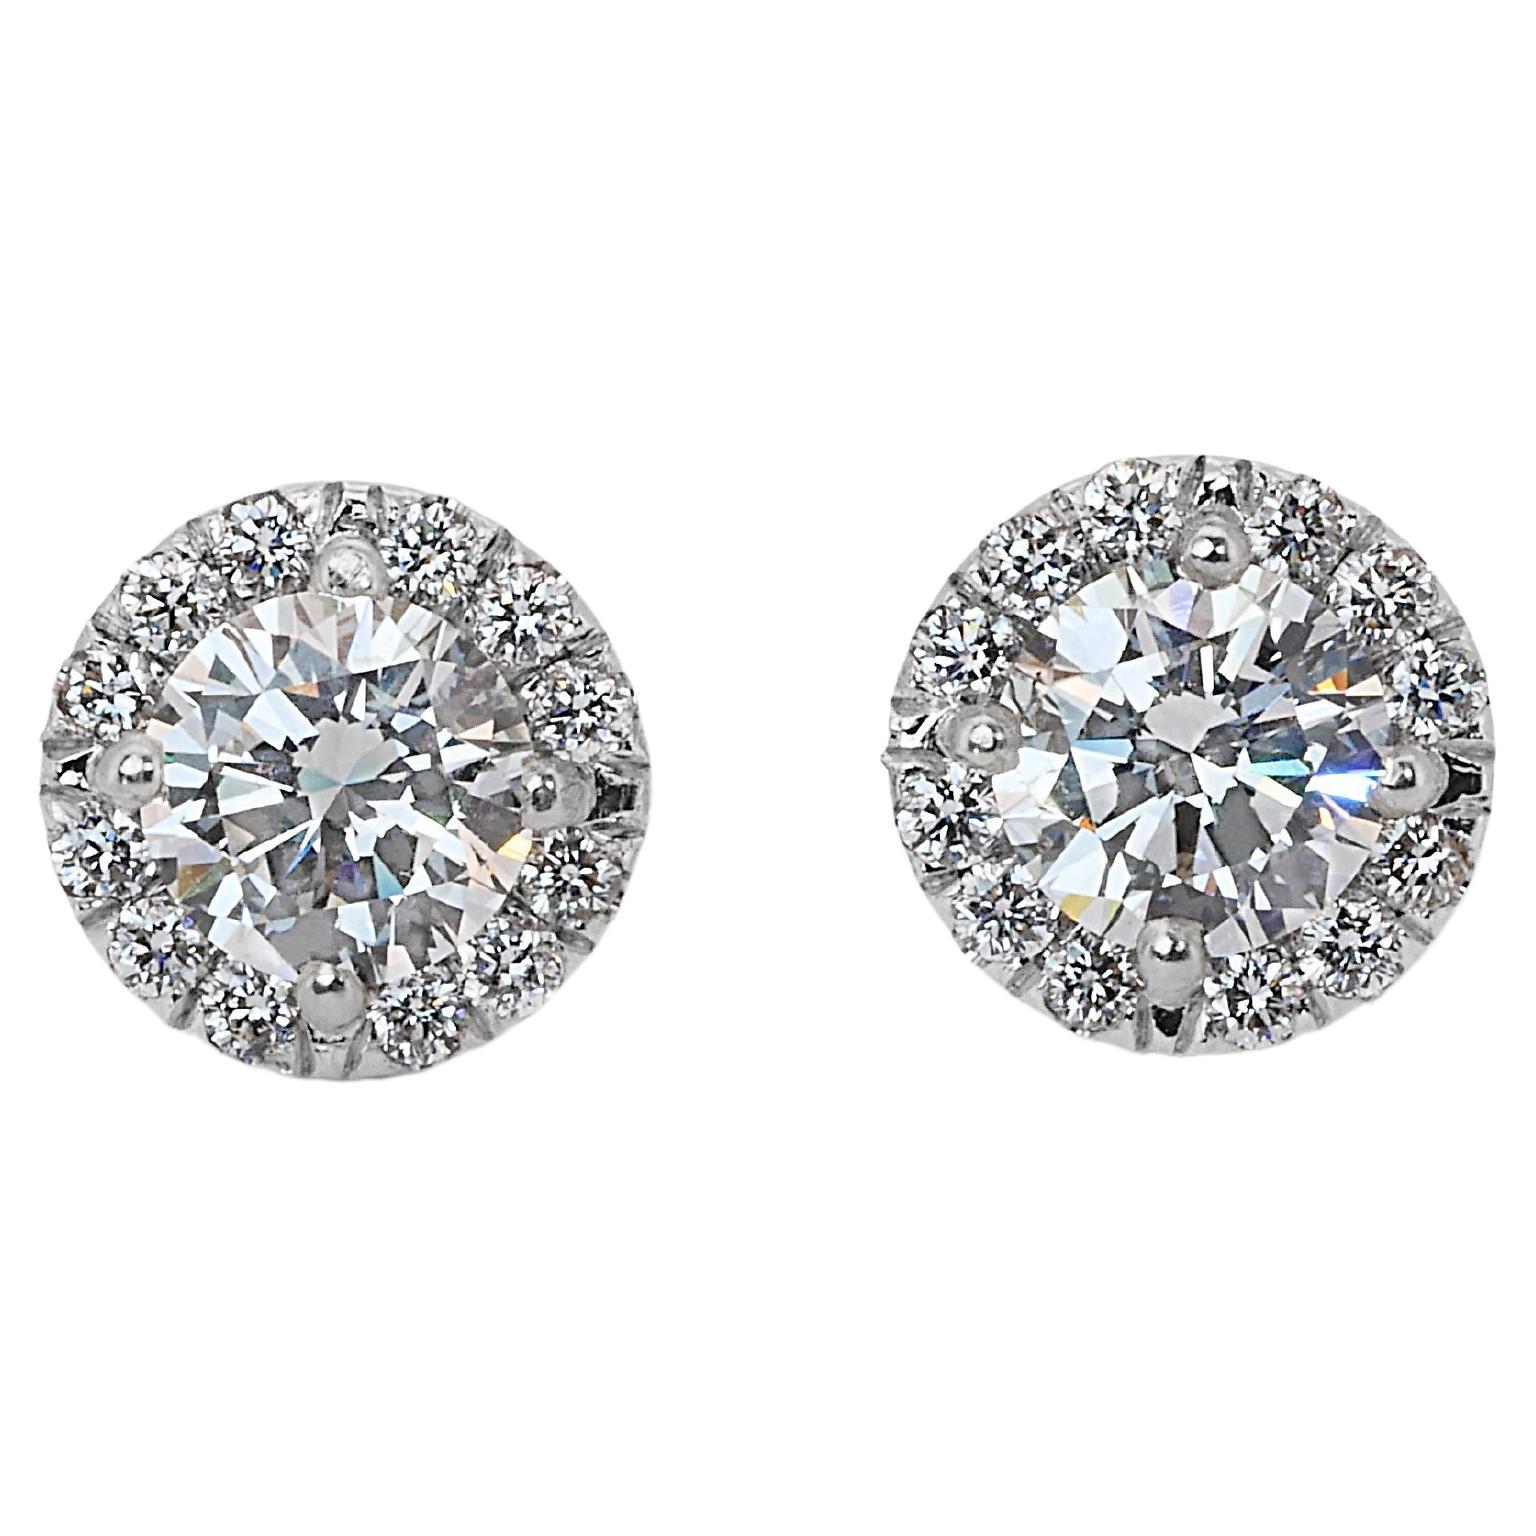 Fascinating 2.55ct Diamond Halo Earrings in 18k White Gold - GIA Certified For Sale